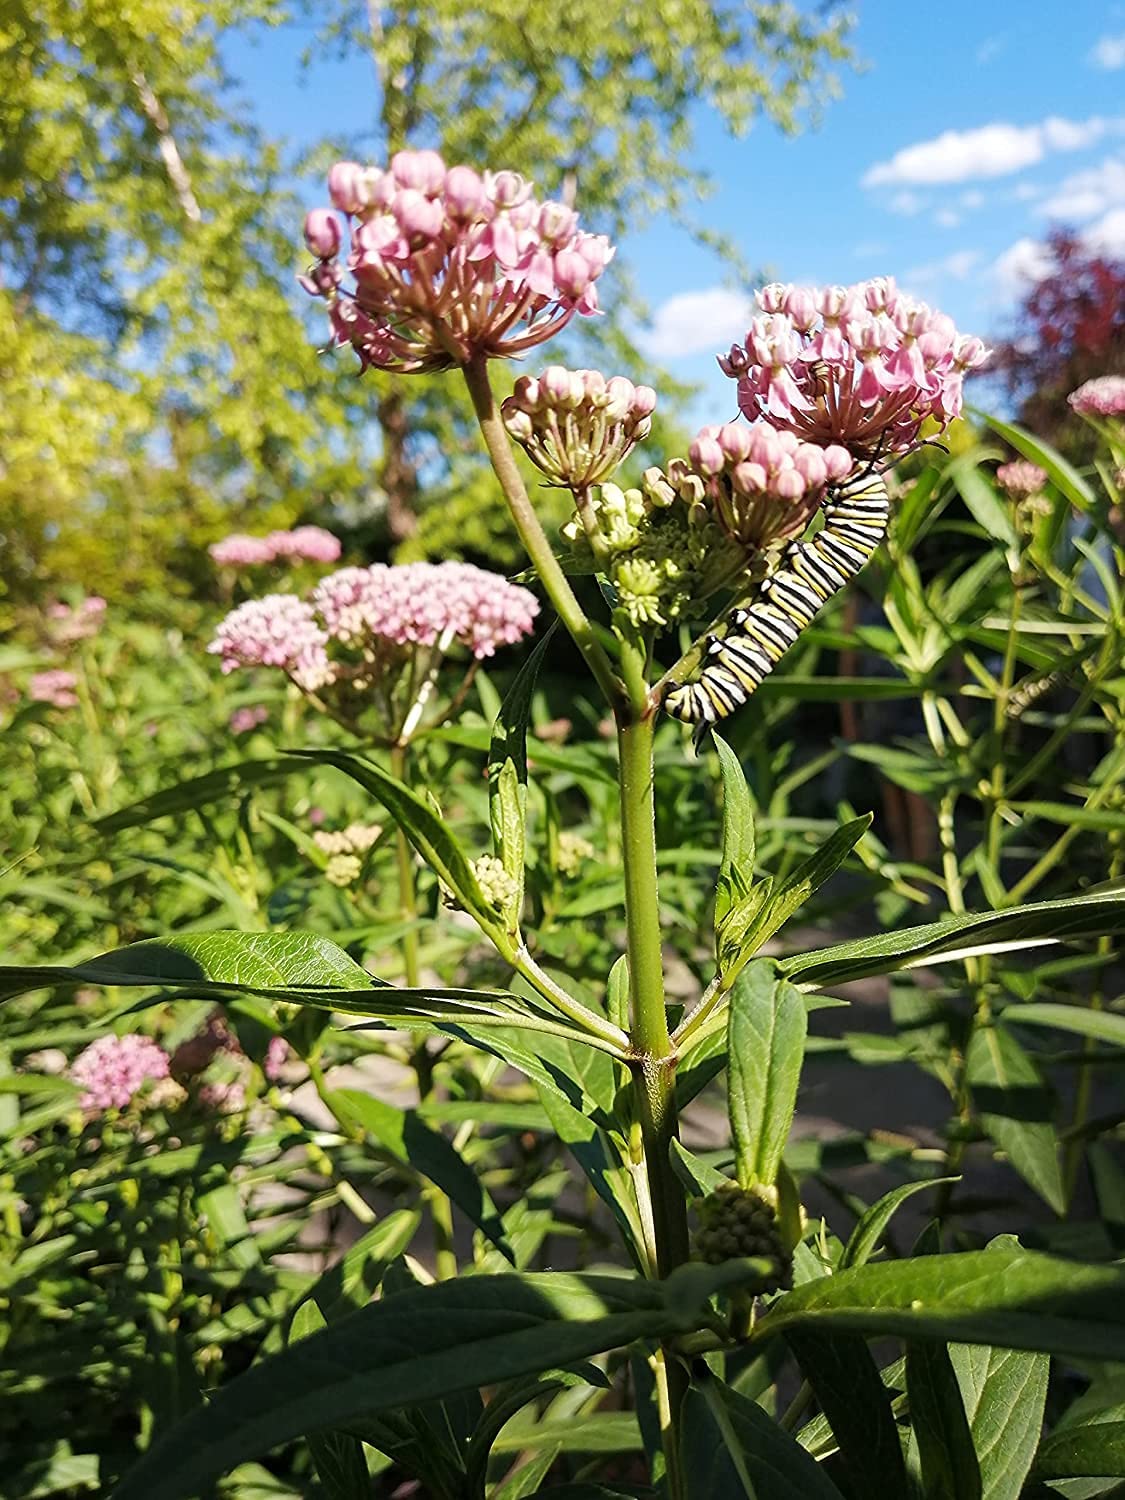 Hundredfold Milkweed Combo Perennial Flower Seeds, Canada Native, Host Plants for Monarch Larvae, Consists of Common Milkweed and Swamp Milkweed - One Package, Two Varieties and 80 Seeds in Total for Monarch Butterfly Garden